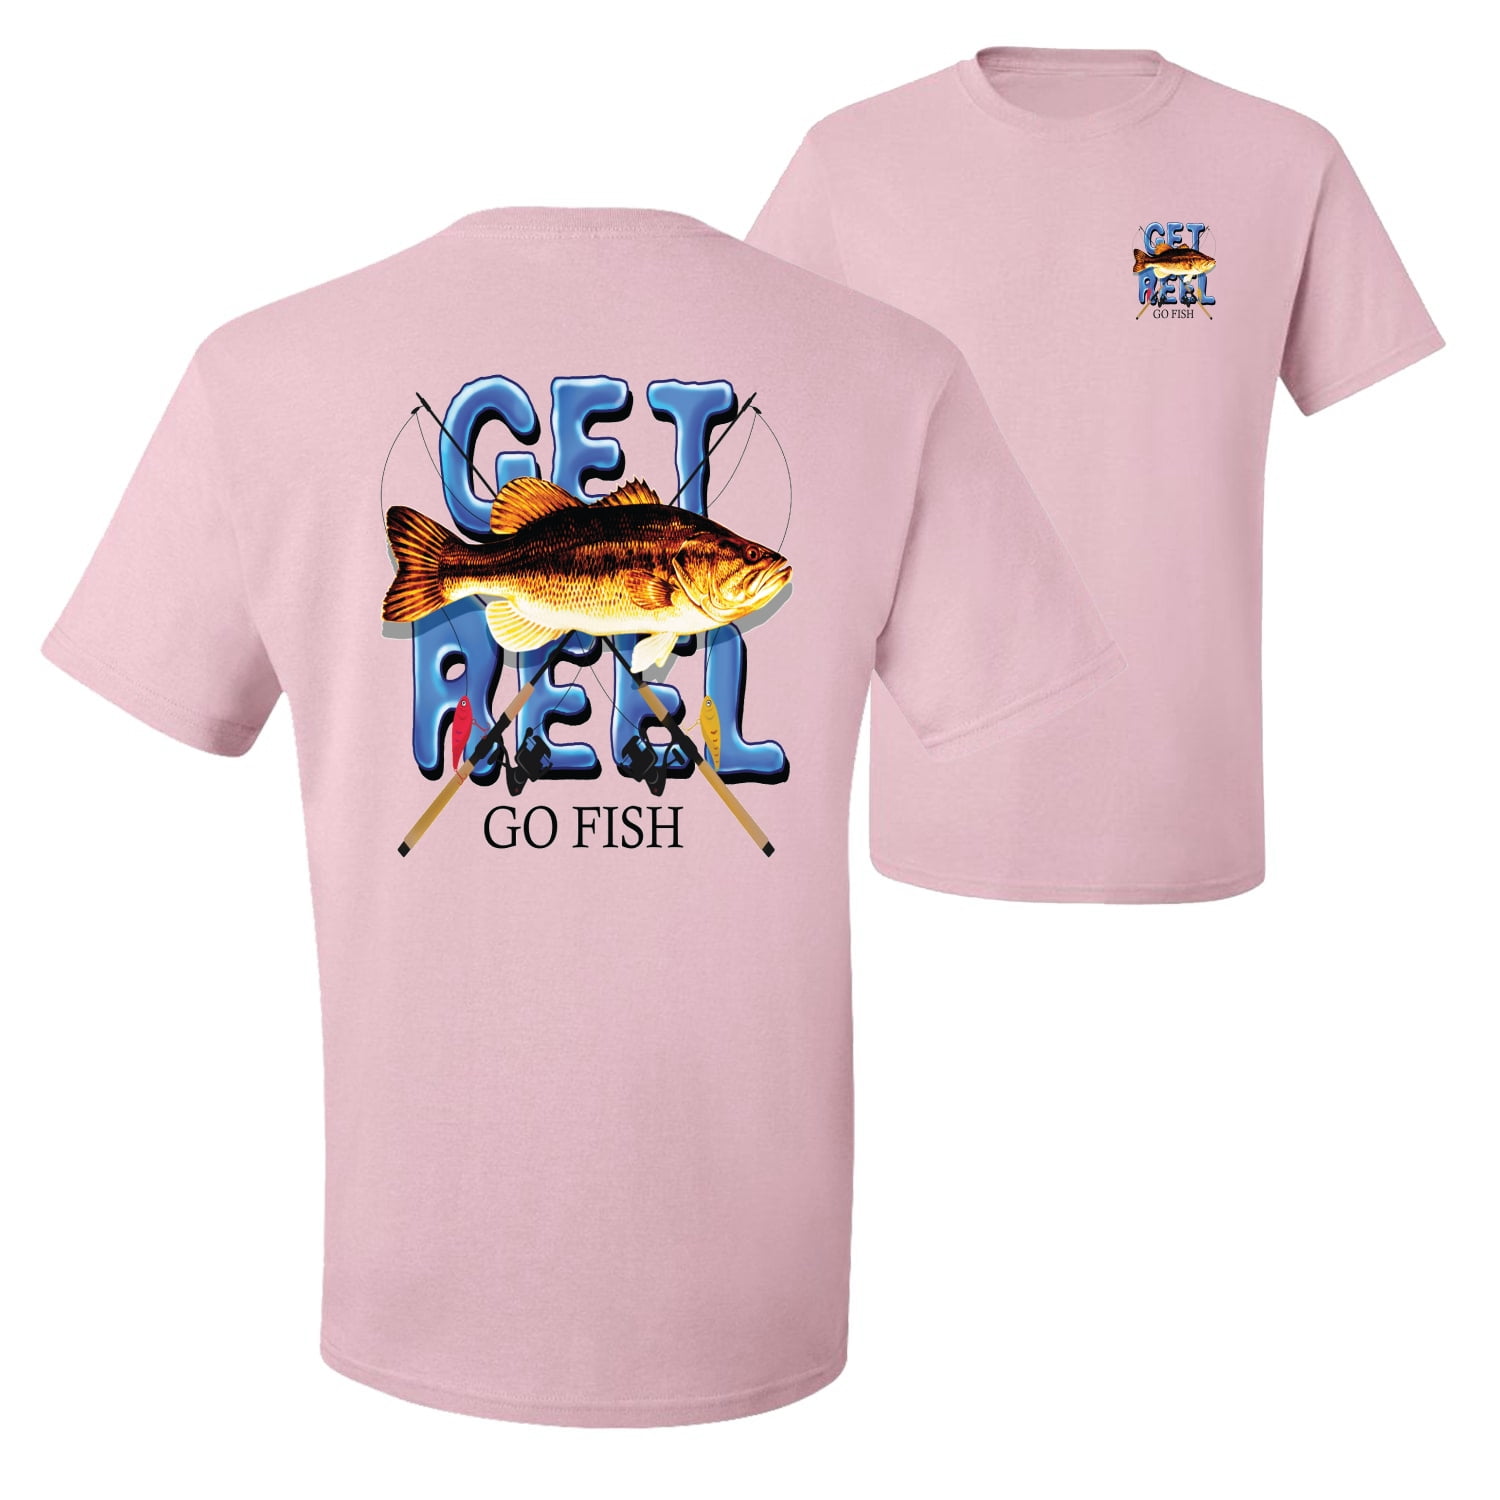 Wild Bobby,Get Reel Go Fish Fishing Front and Back Men's Graphic T-Shirt,  Light Pink, Medium